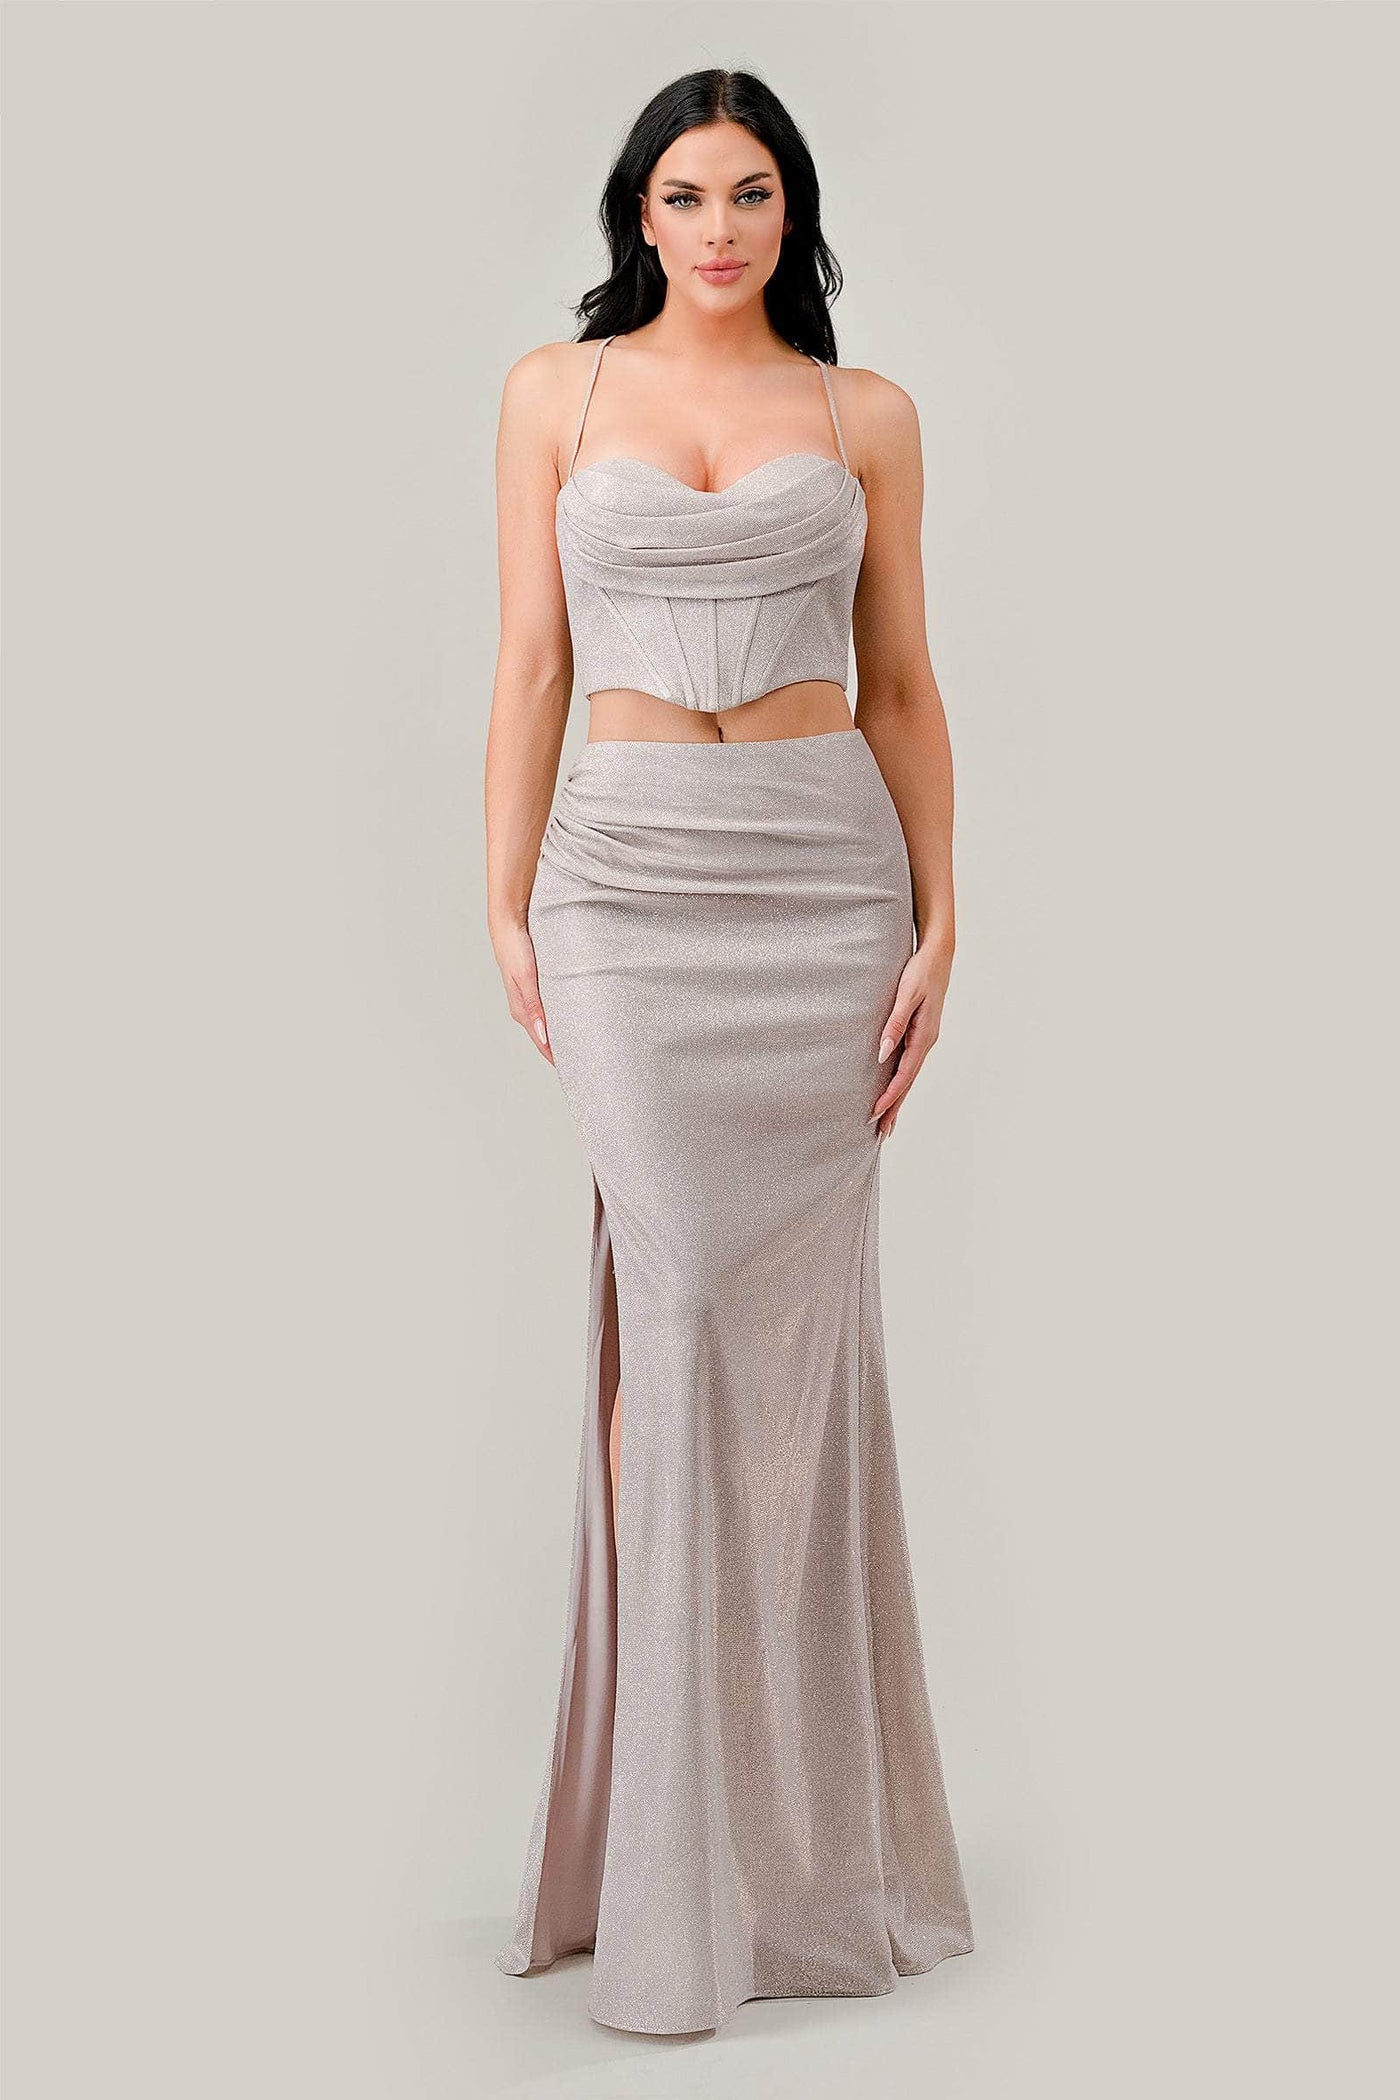 Ladivine CD350 - Draped Sweetheart Evening Dress Special Occasion Dress